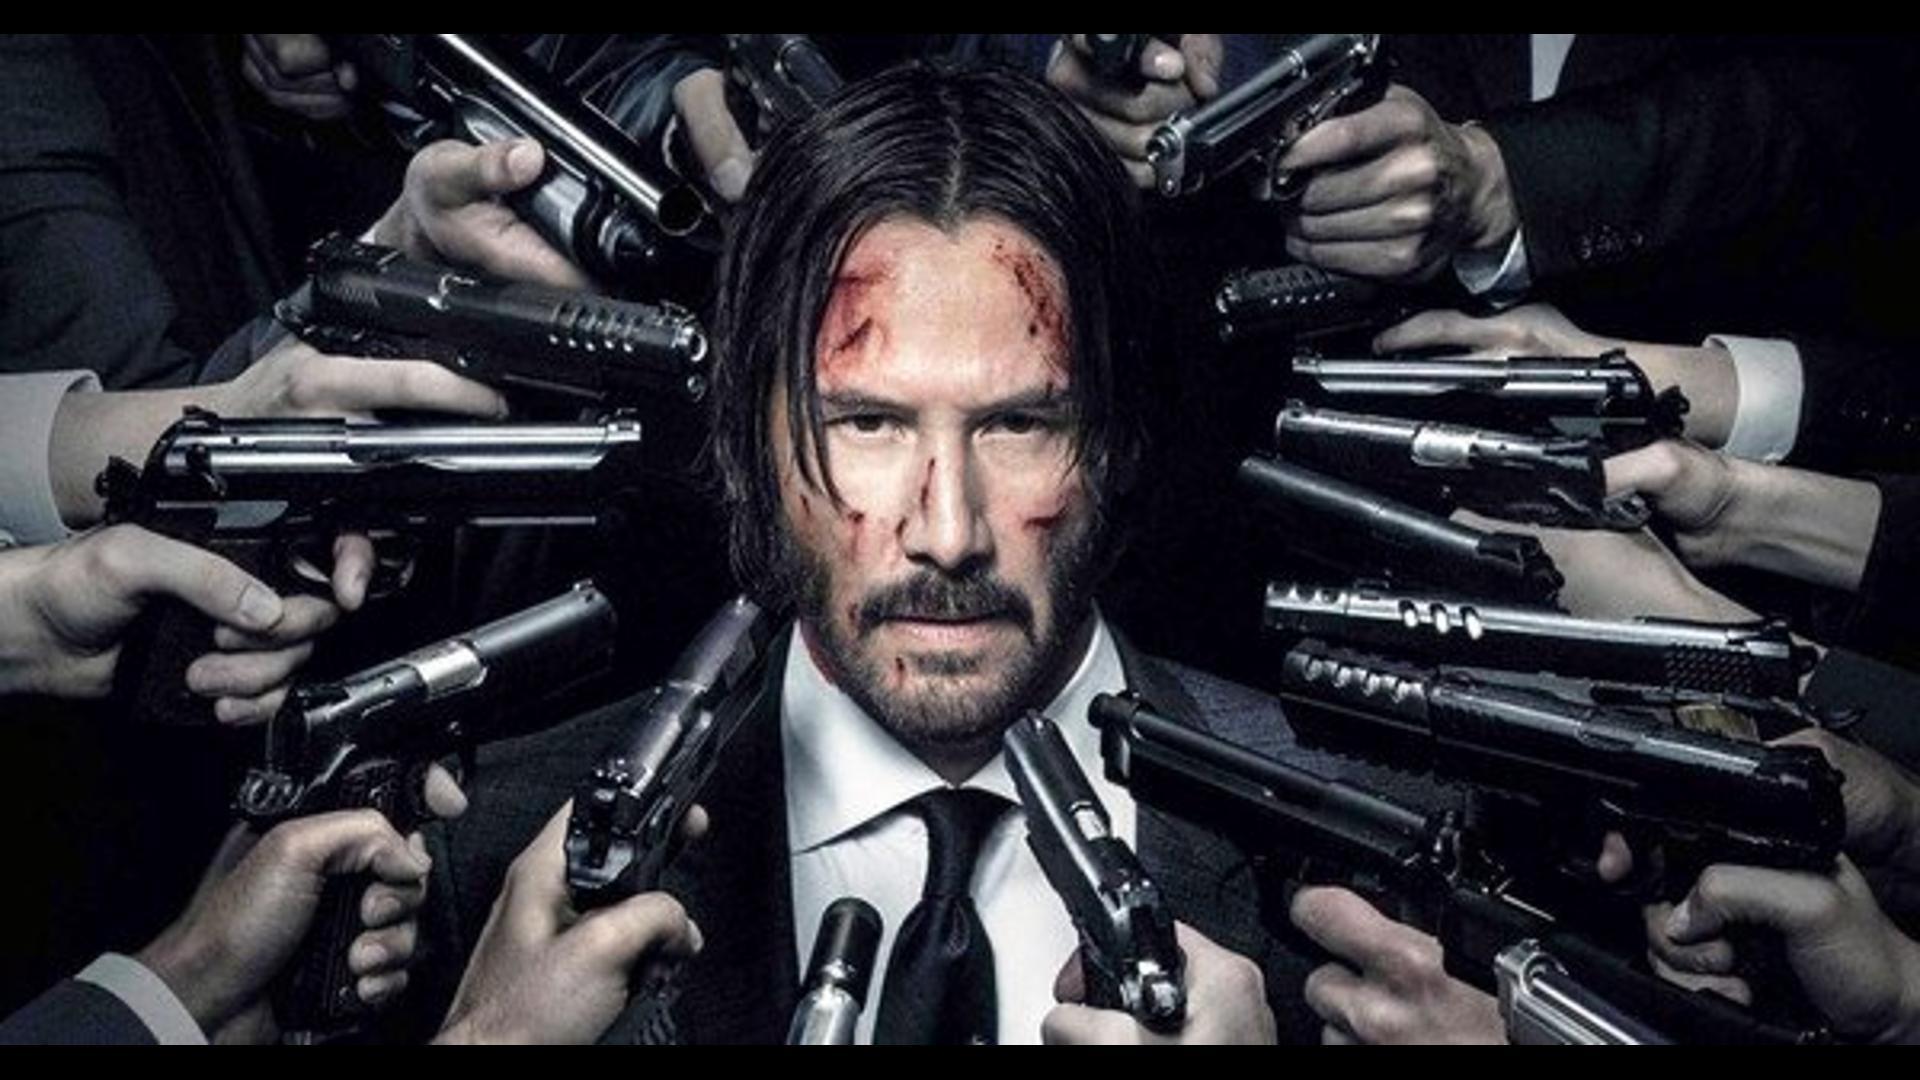 keanu-reeves-confirms-title-for-john-wick-3-screen-capture-1120594